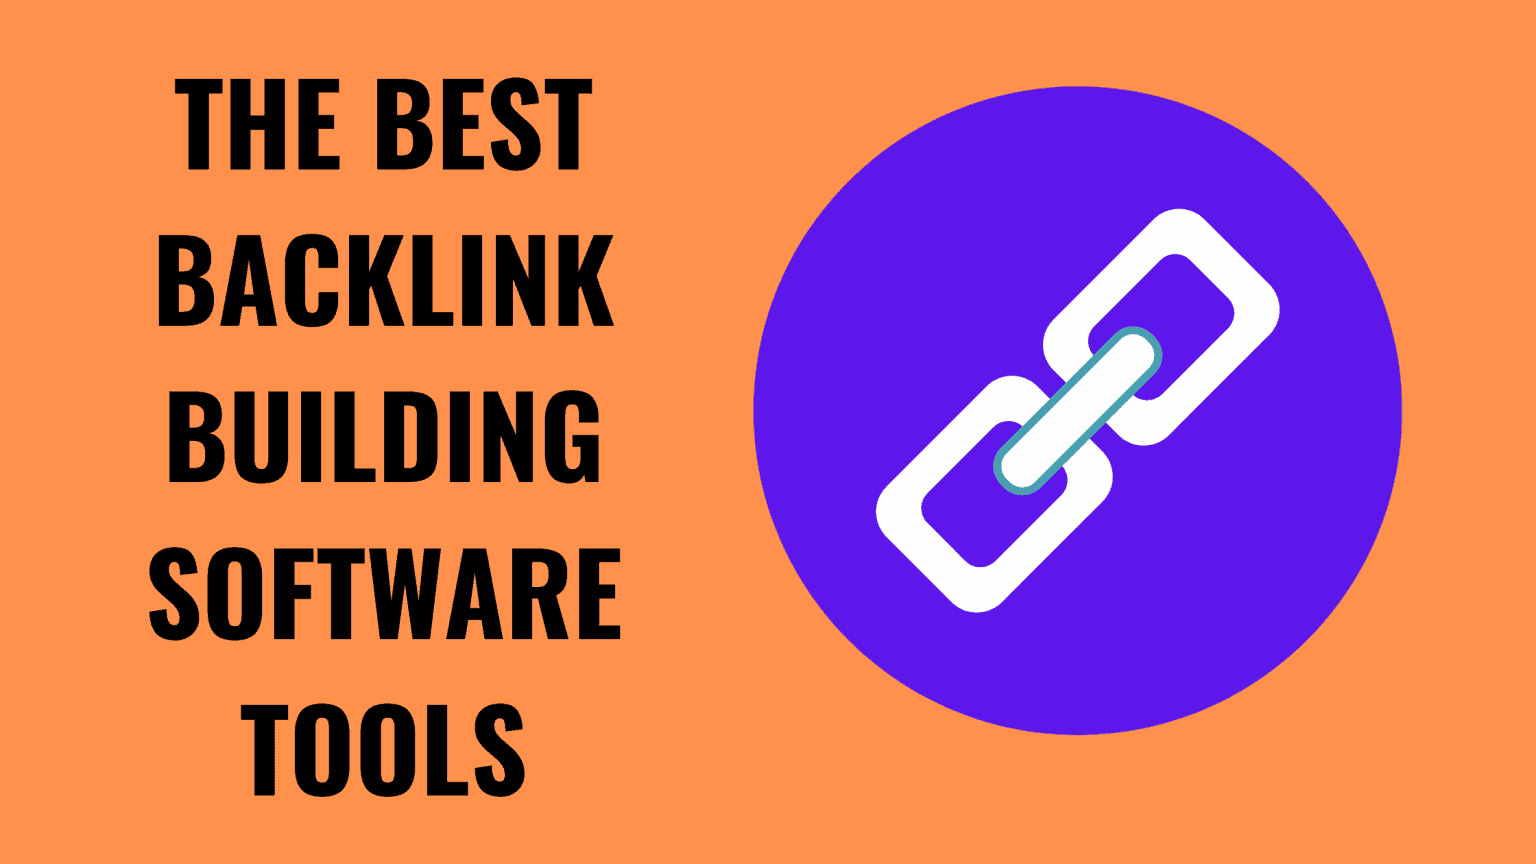 The-Best-Backlink-Building-Software-Tools-1536x864.png